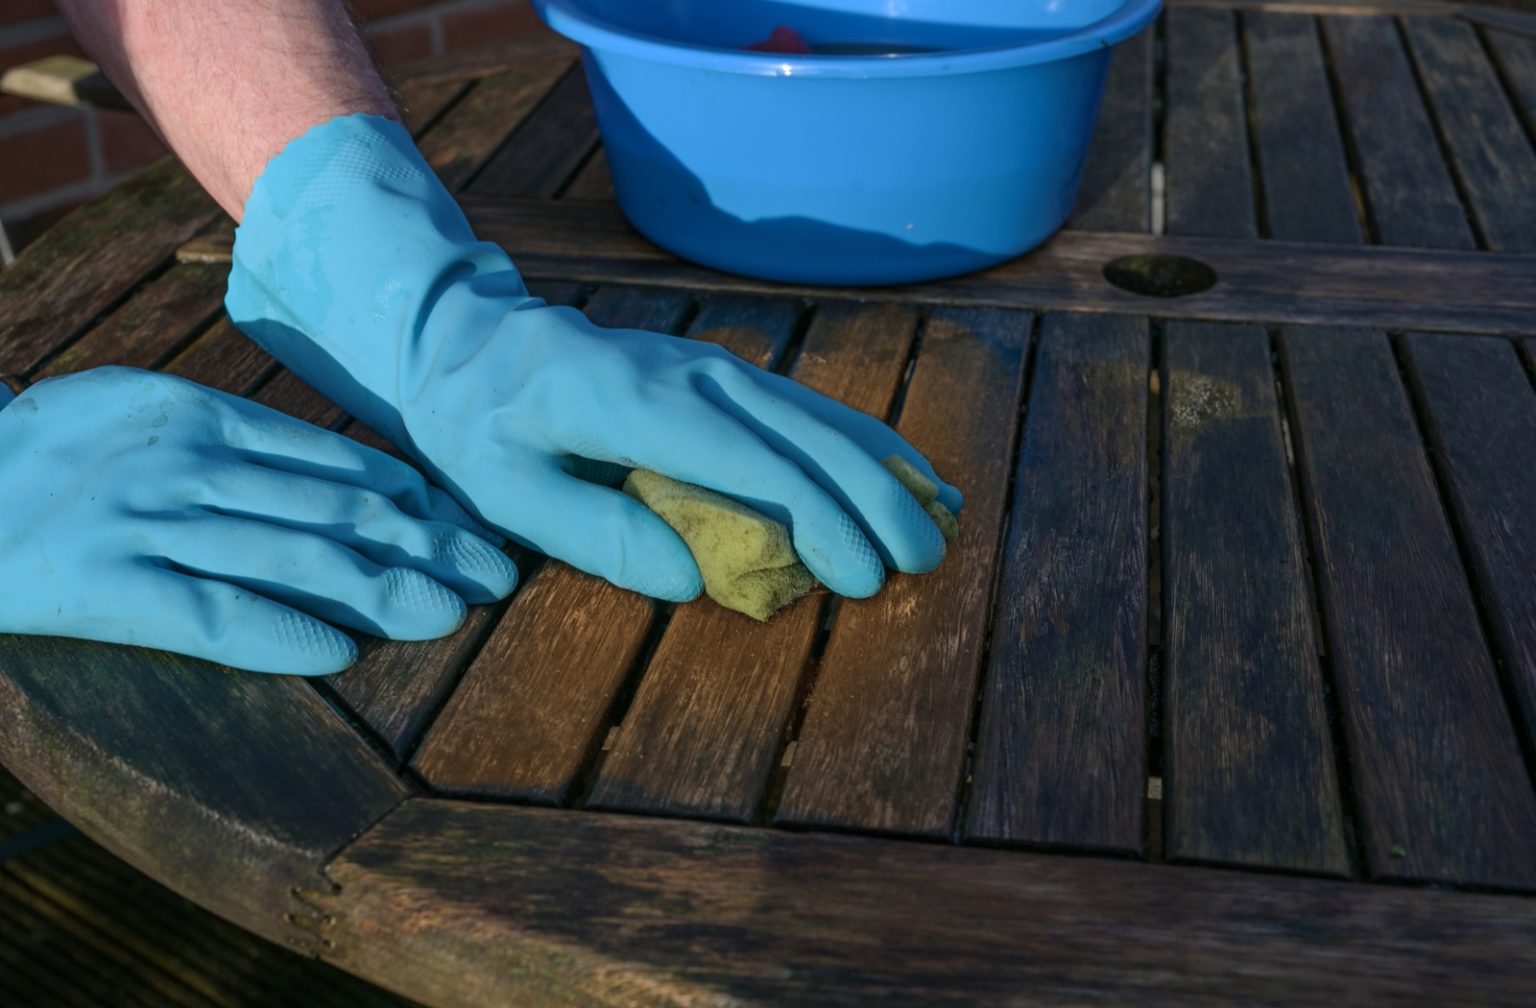 A person wearing blue rubber gloves using a sponge with soapy water to clean their dirty, wooden outdoor patio furniture